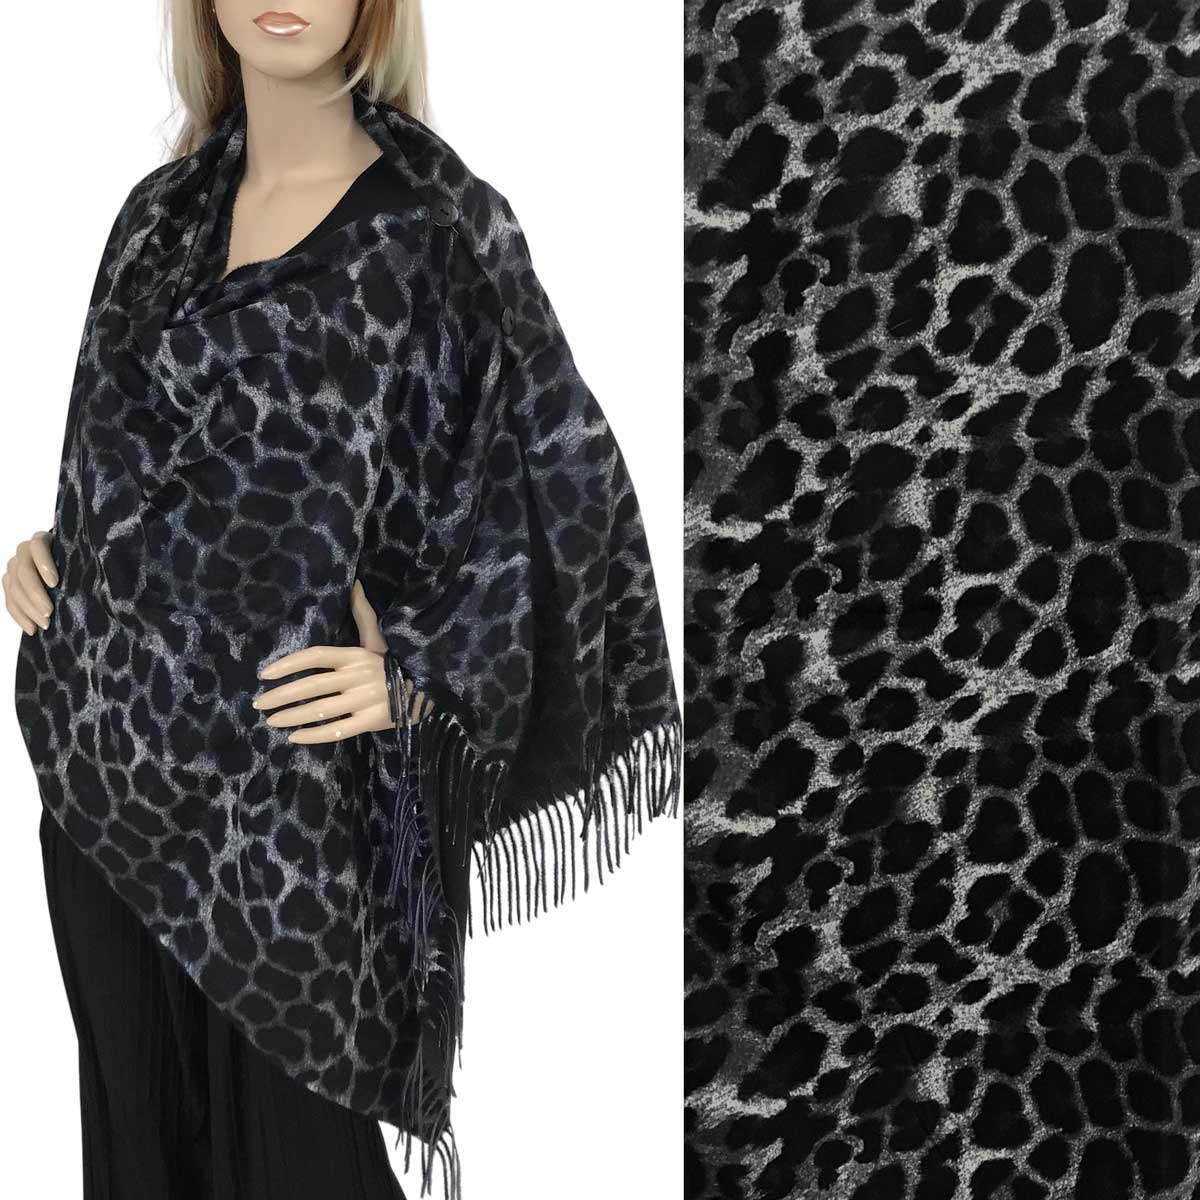 Wholesale3305 - Suede Cloth Animal Print Button Poncho/Shaw-LEOPARD  BLACK/GREY Suede Cloth Animal Print Shawl with Buttons